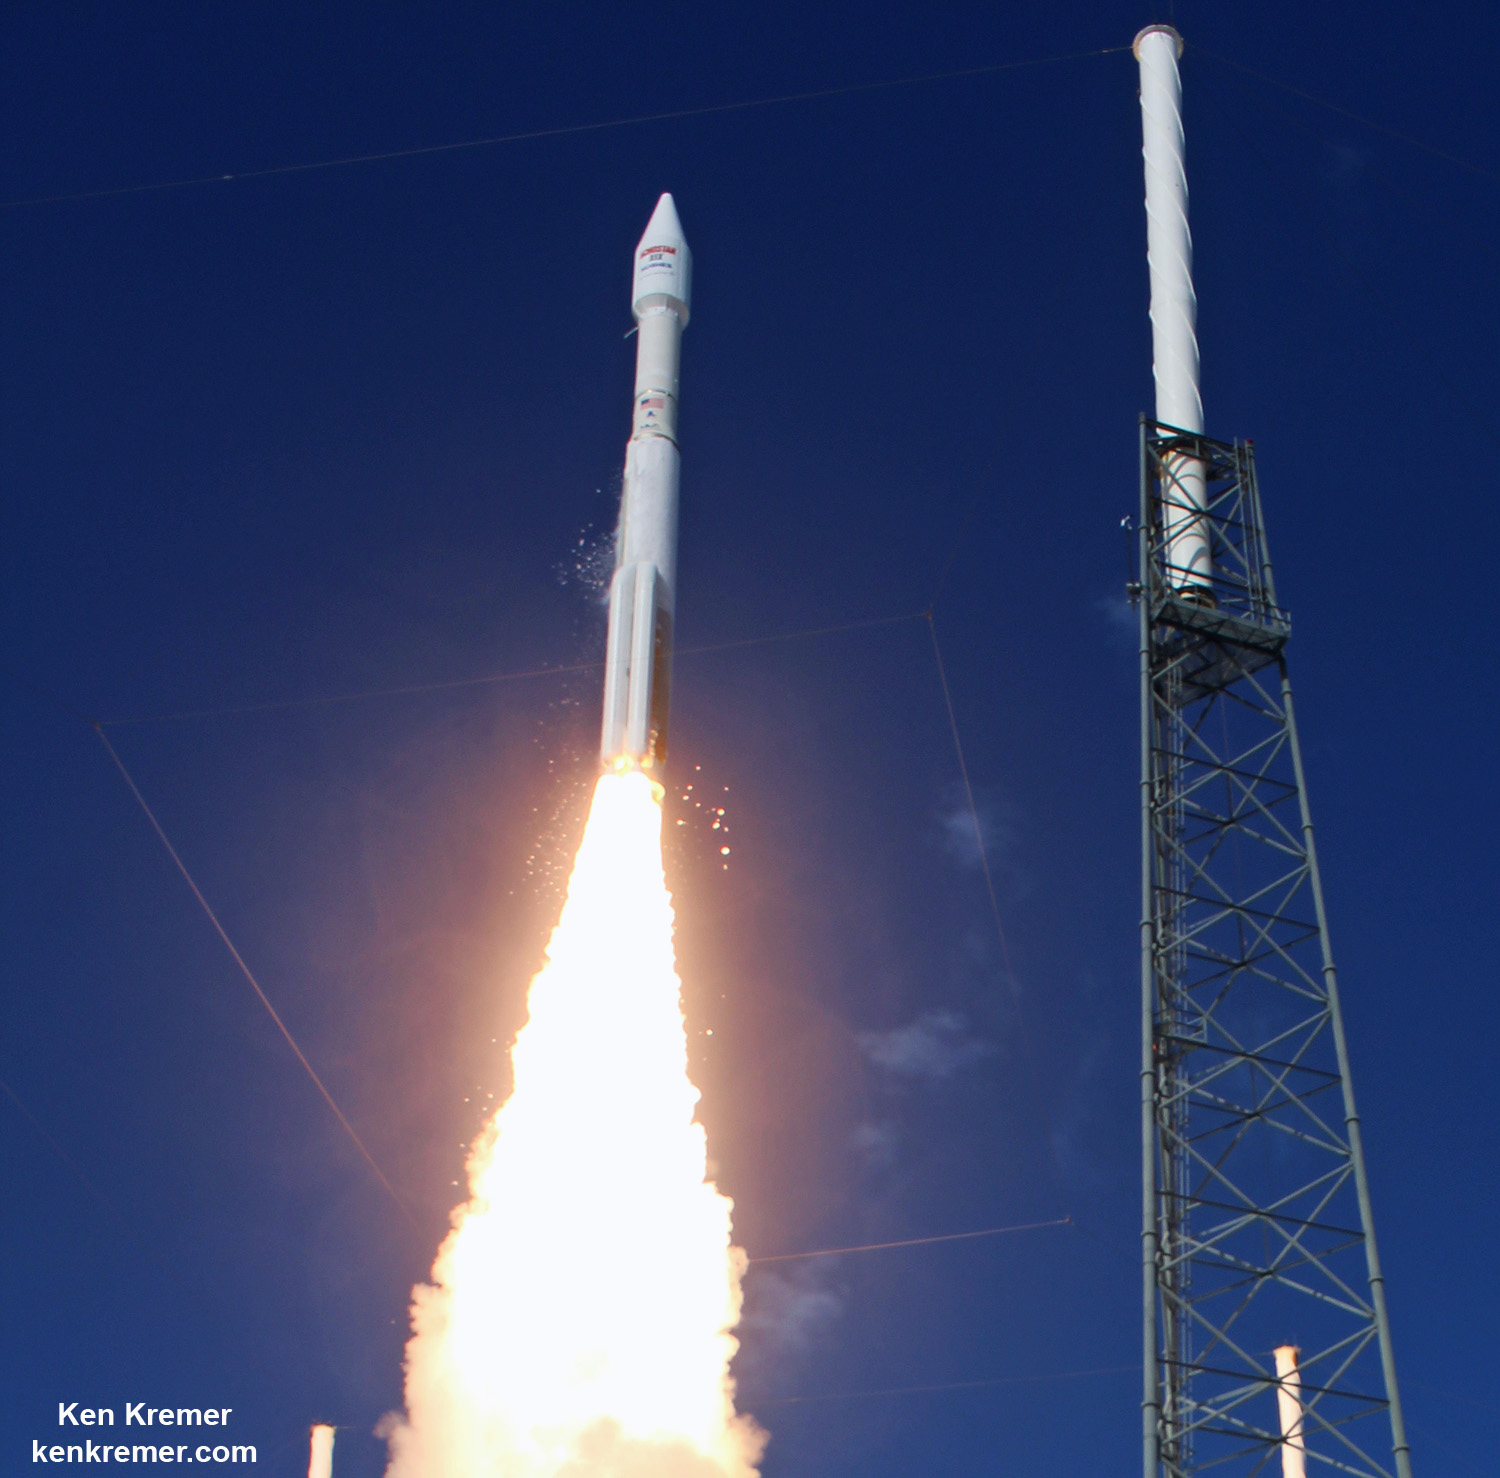 EchoStar XIX satellite speeds to geosynchronous orbit launching atop ULA Atlas V rocket from pad 41 on Cape Canaveral Air Force Station at 2:13 p.m. ET on Dec. 18, 2016.  Credit: Ken Kremer/kenkremer.com